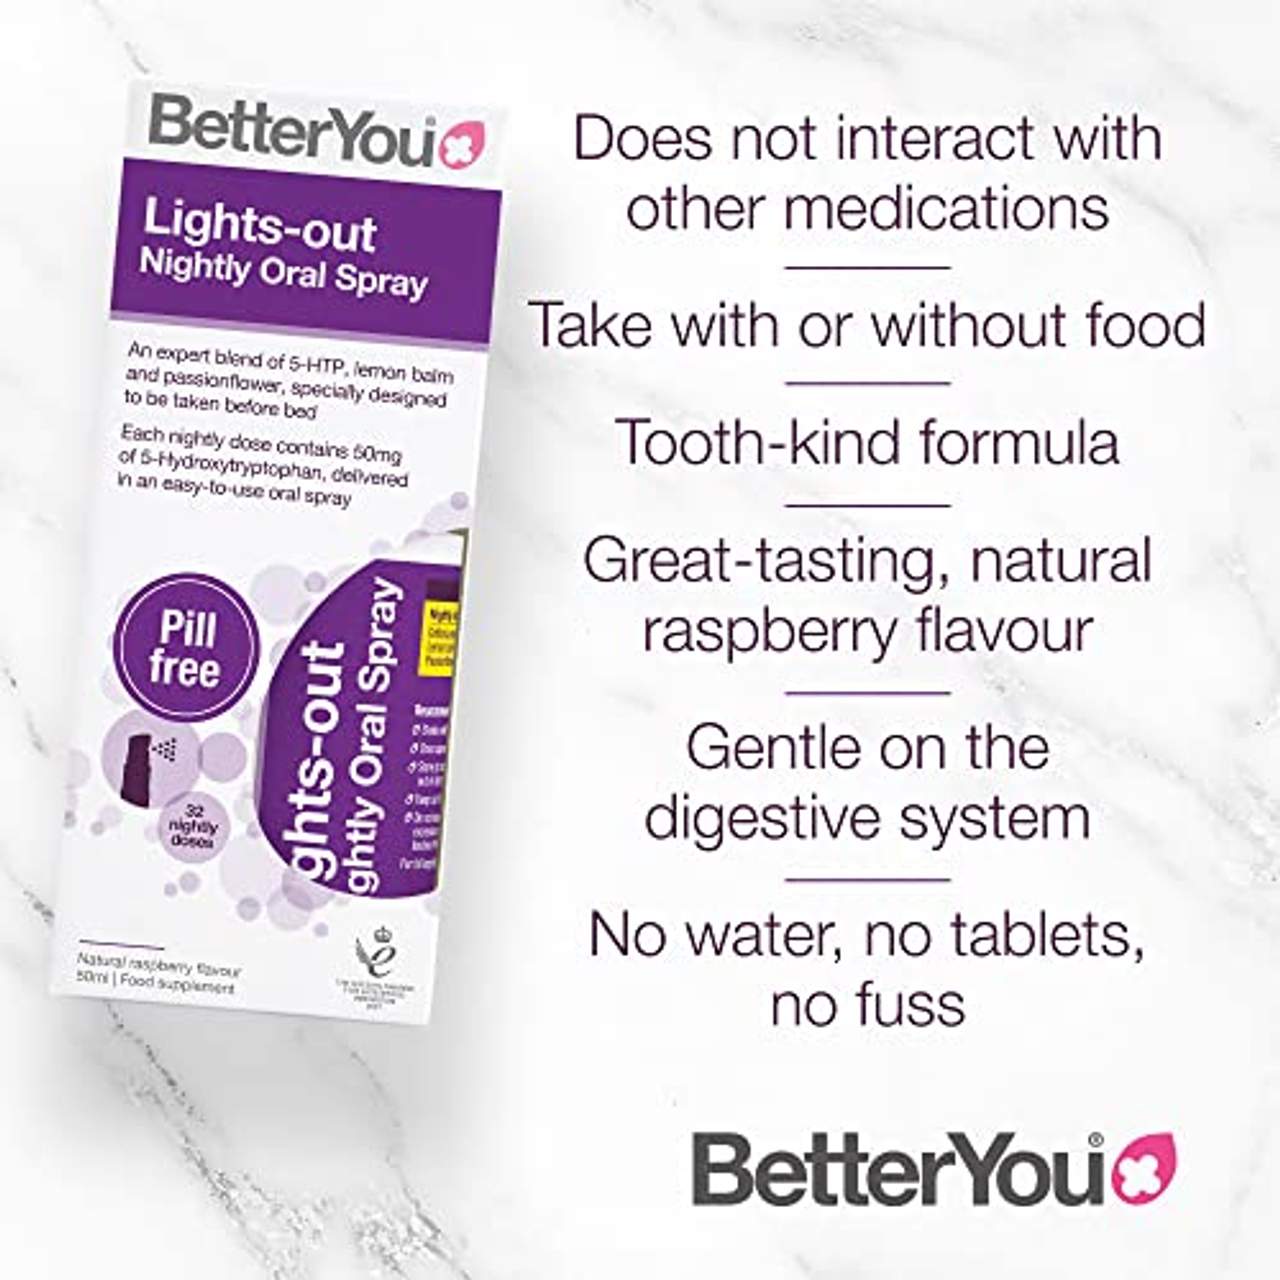 BetterYou Lights-Out 5-HTP Nightly Oral Spray